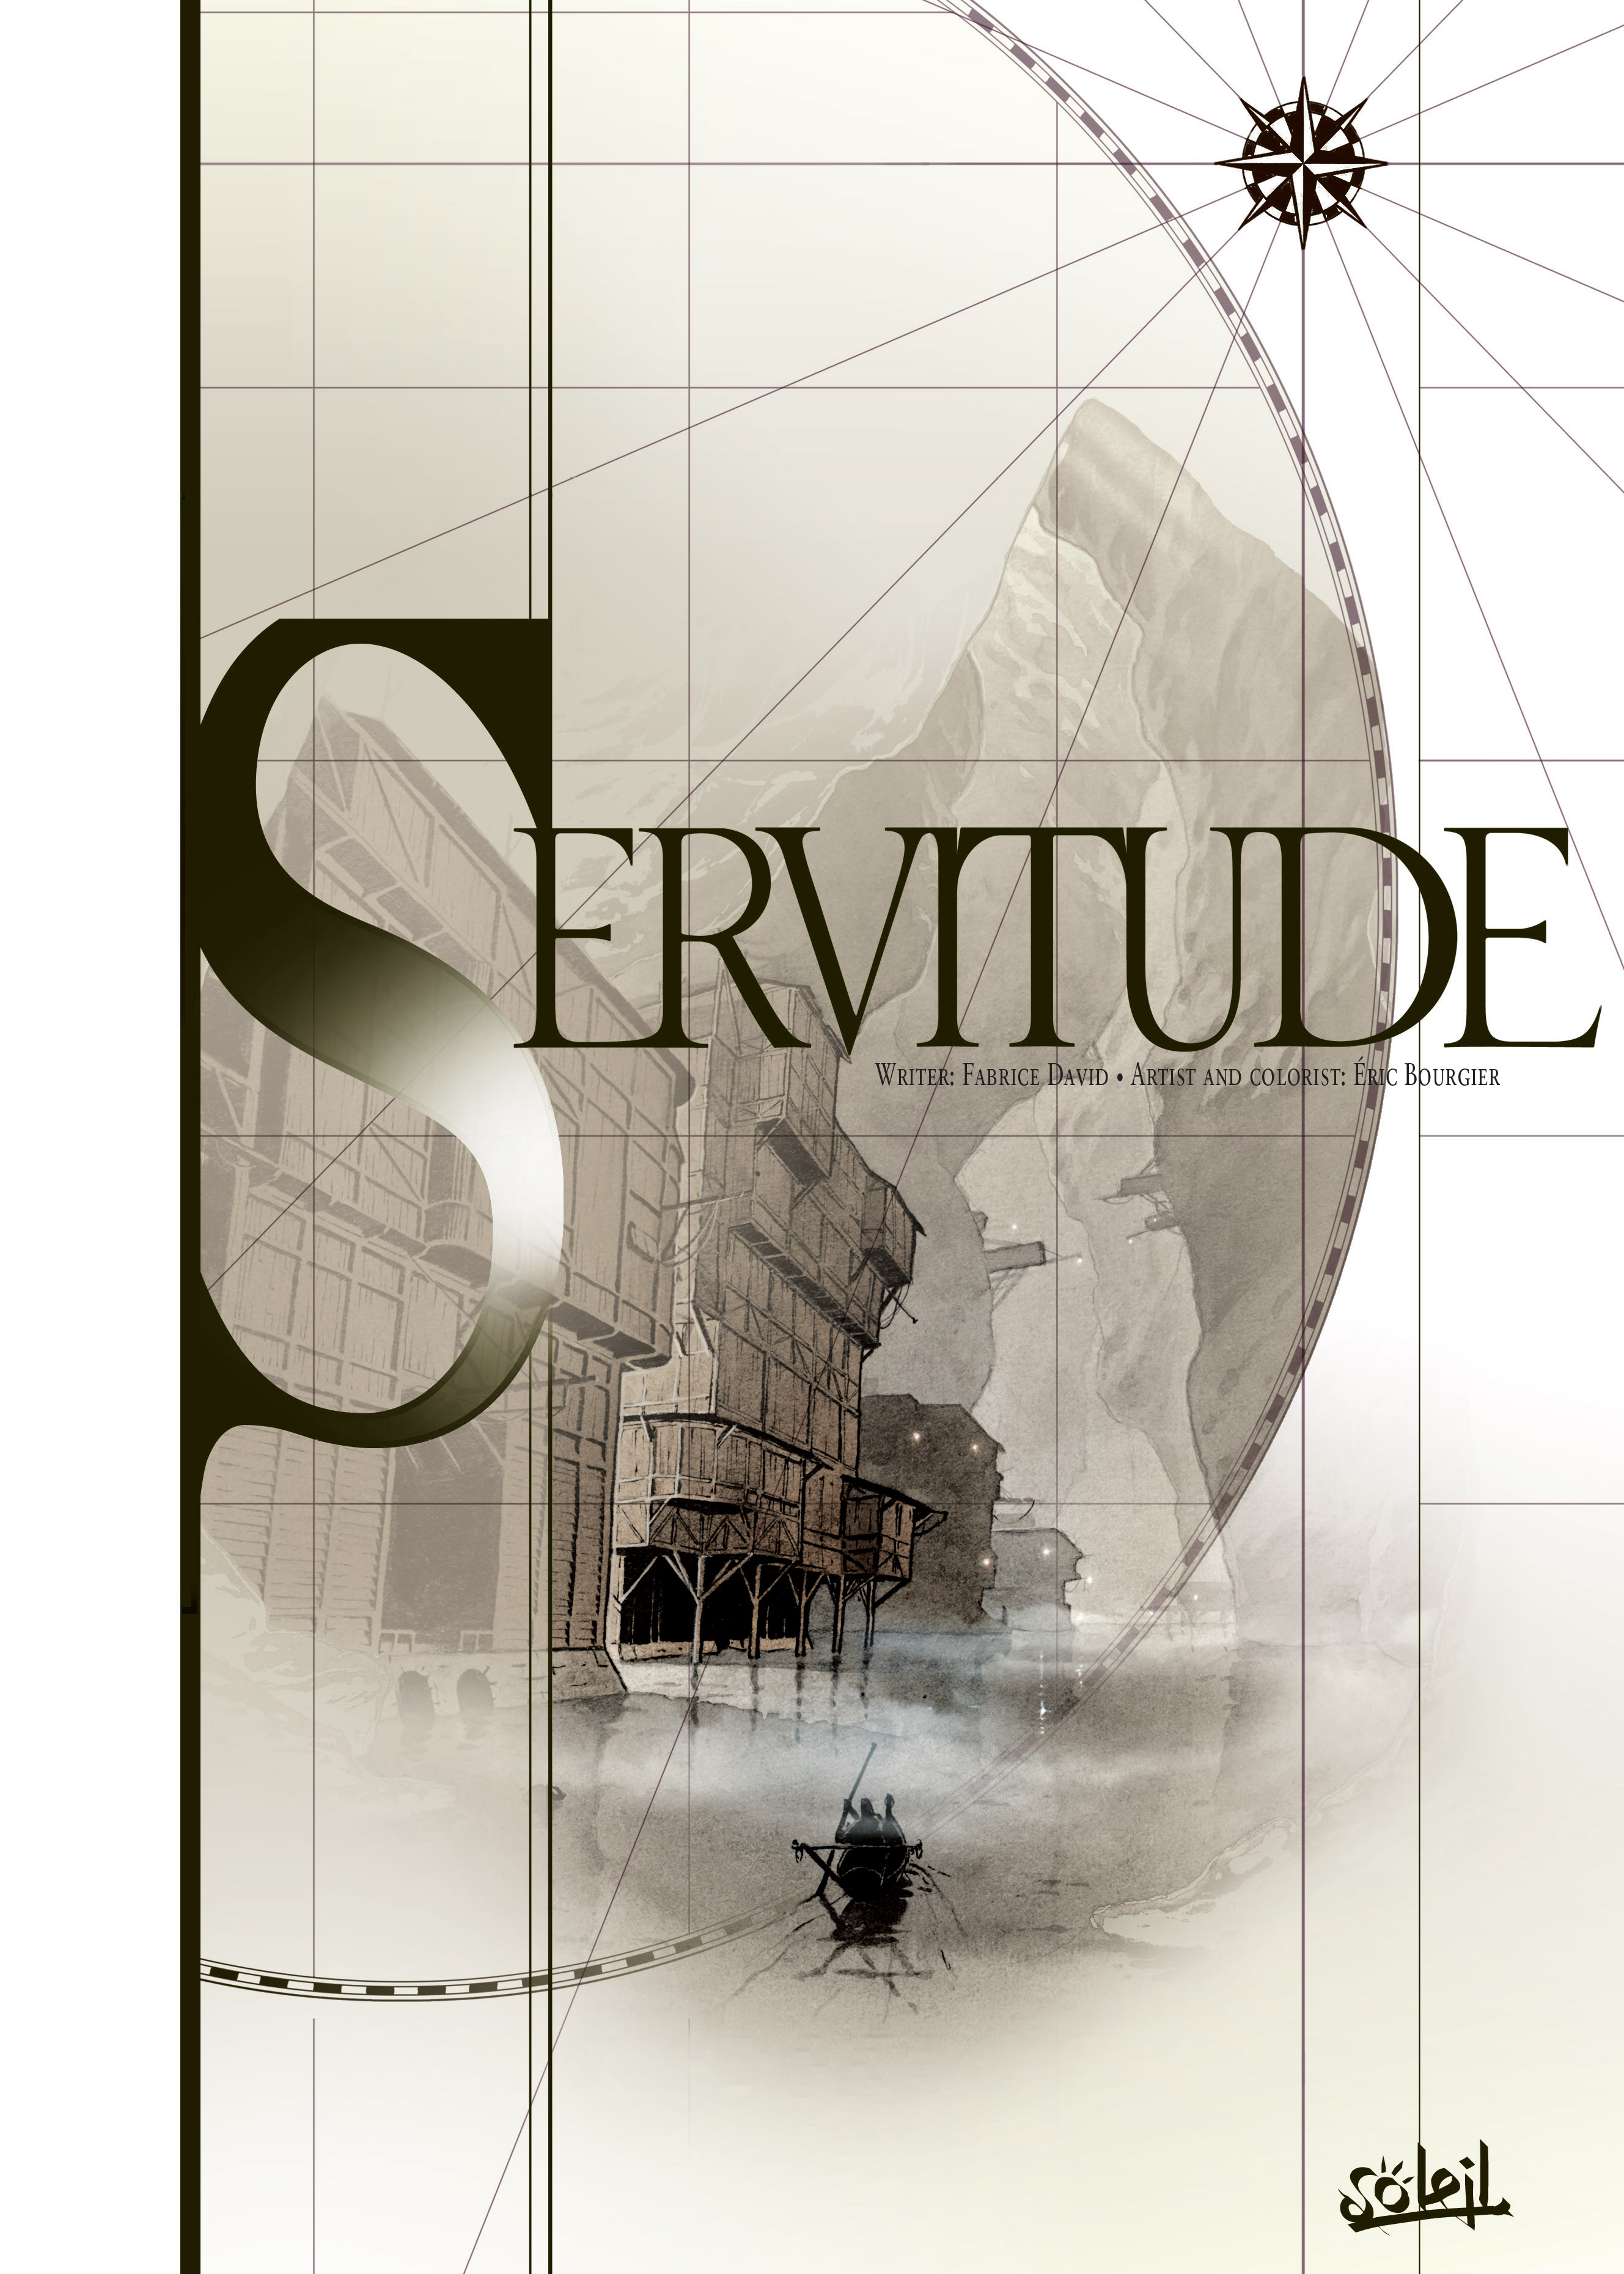 Read online Servitude comic -  Issue #2 - 3